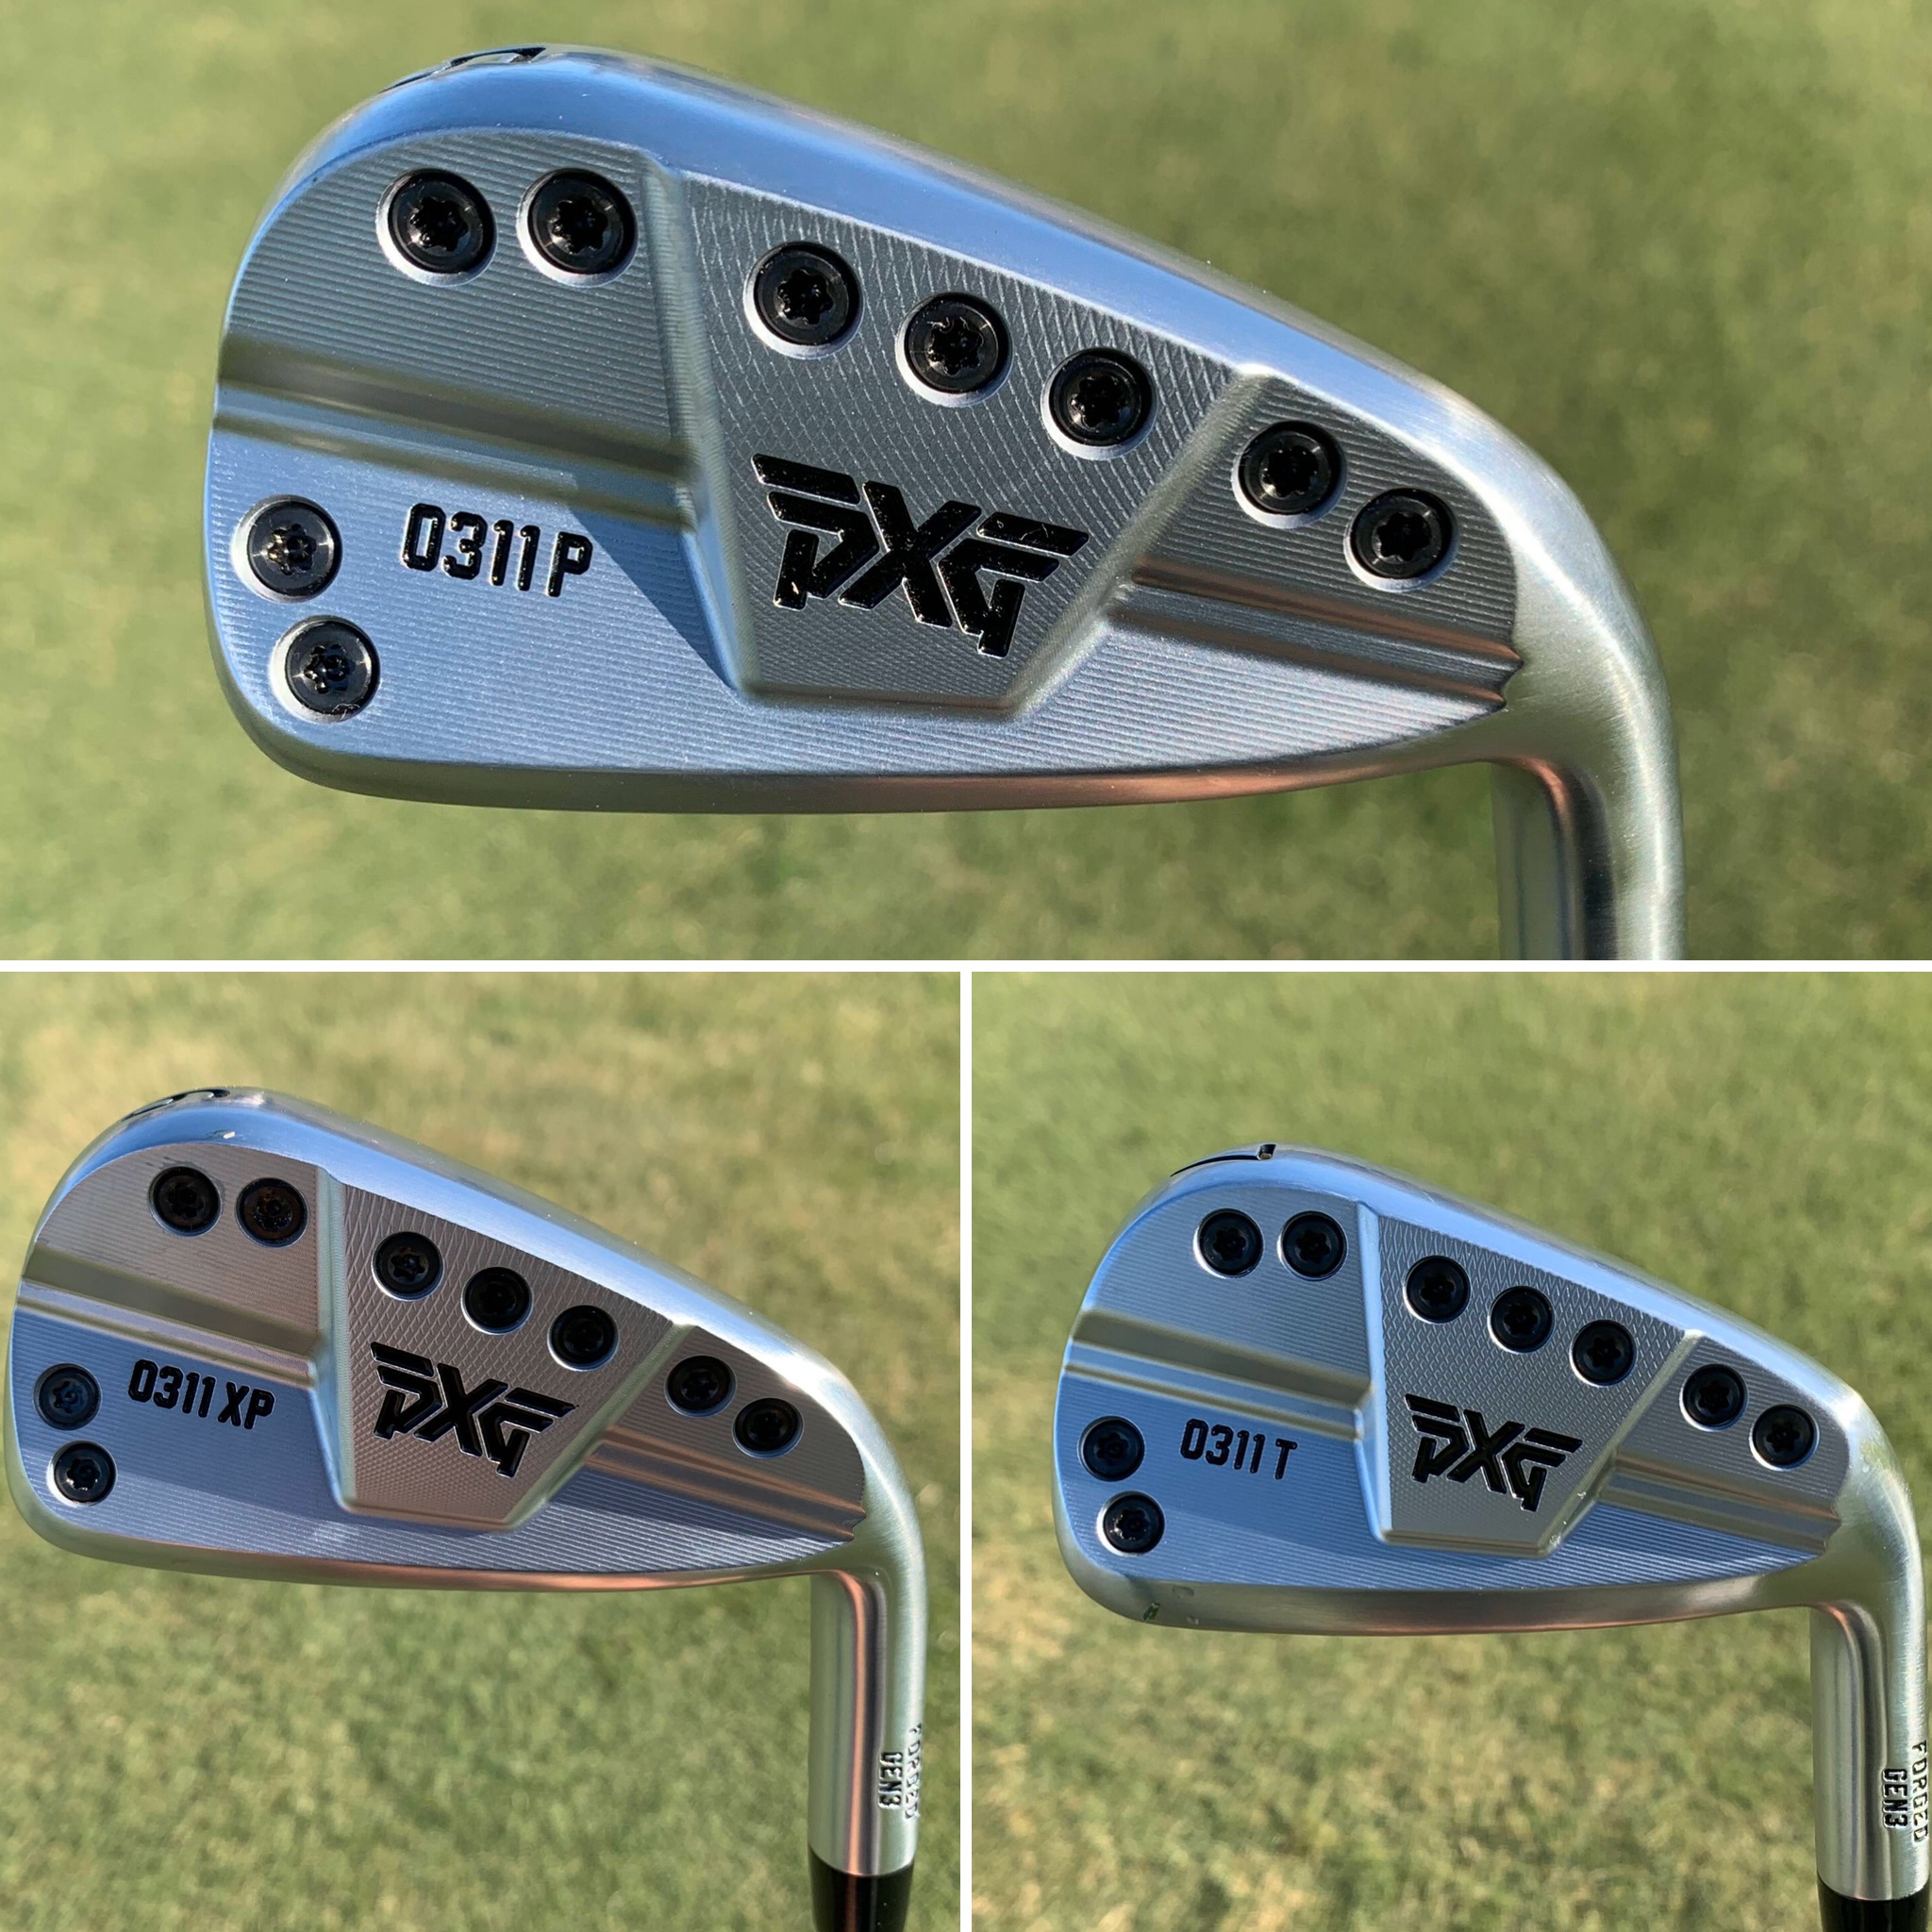 New 2020 PXG 0311 Gen 3 P, T, and XP irons – GolfWRX